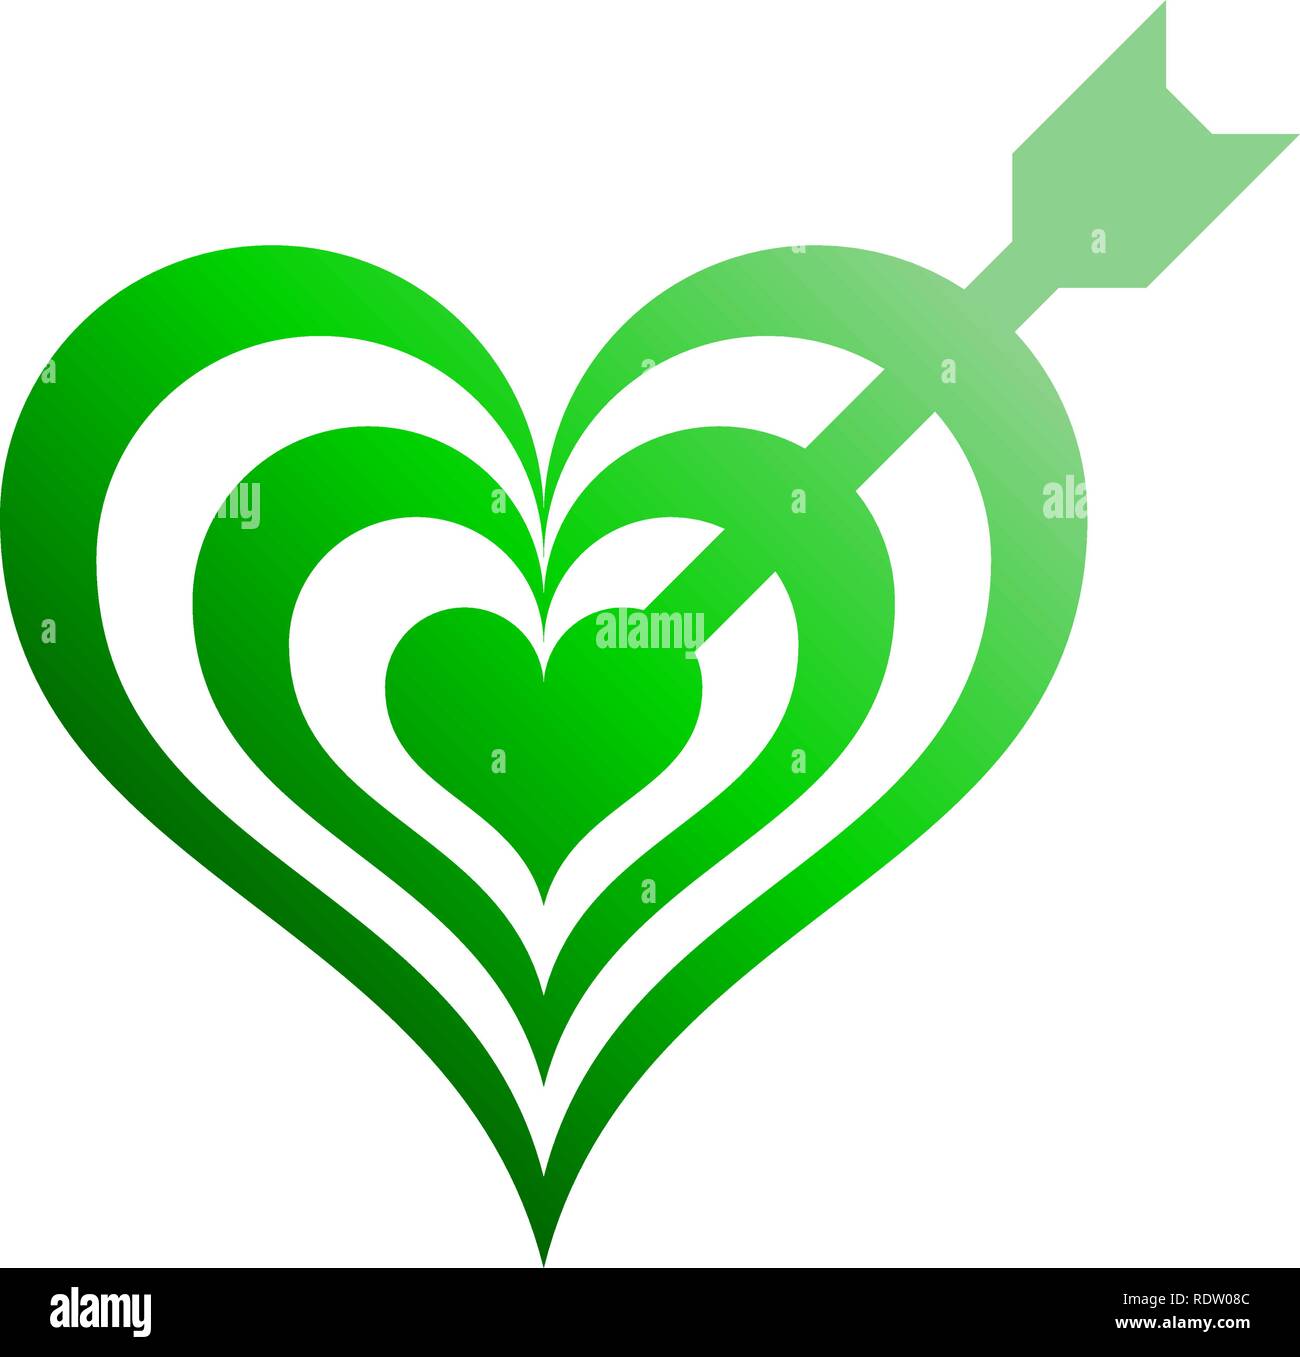 Heart target with arrow symbol icon - green gradient, isolated - vector illustration Stock Vector